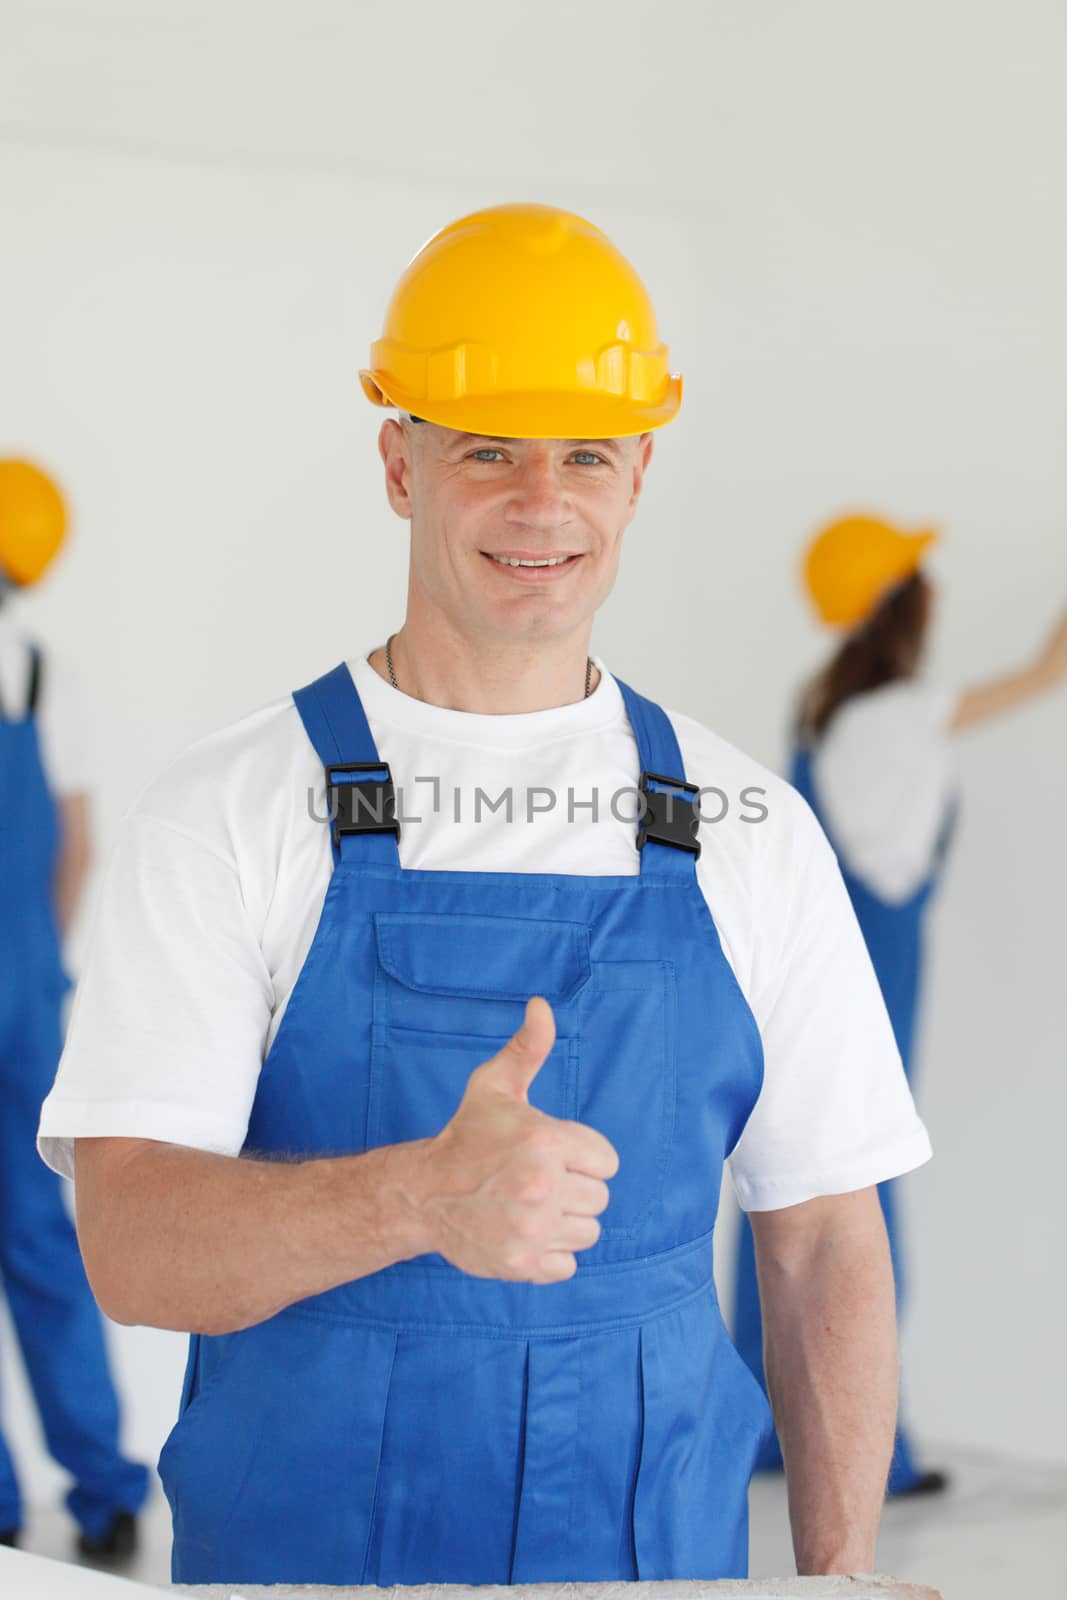 workman gives thumbs up in front of two painters